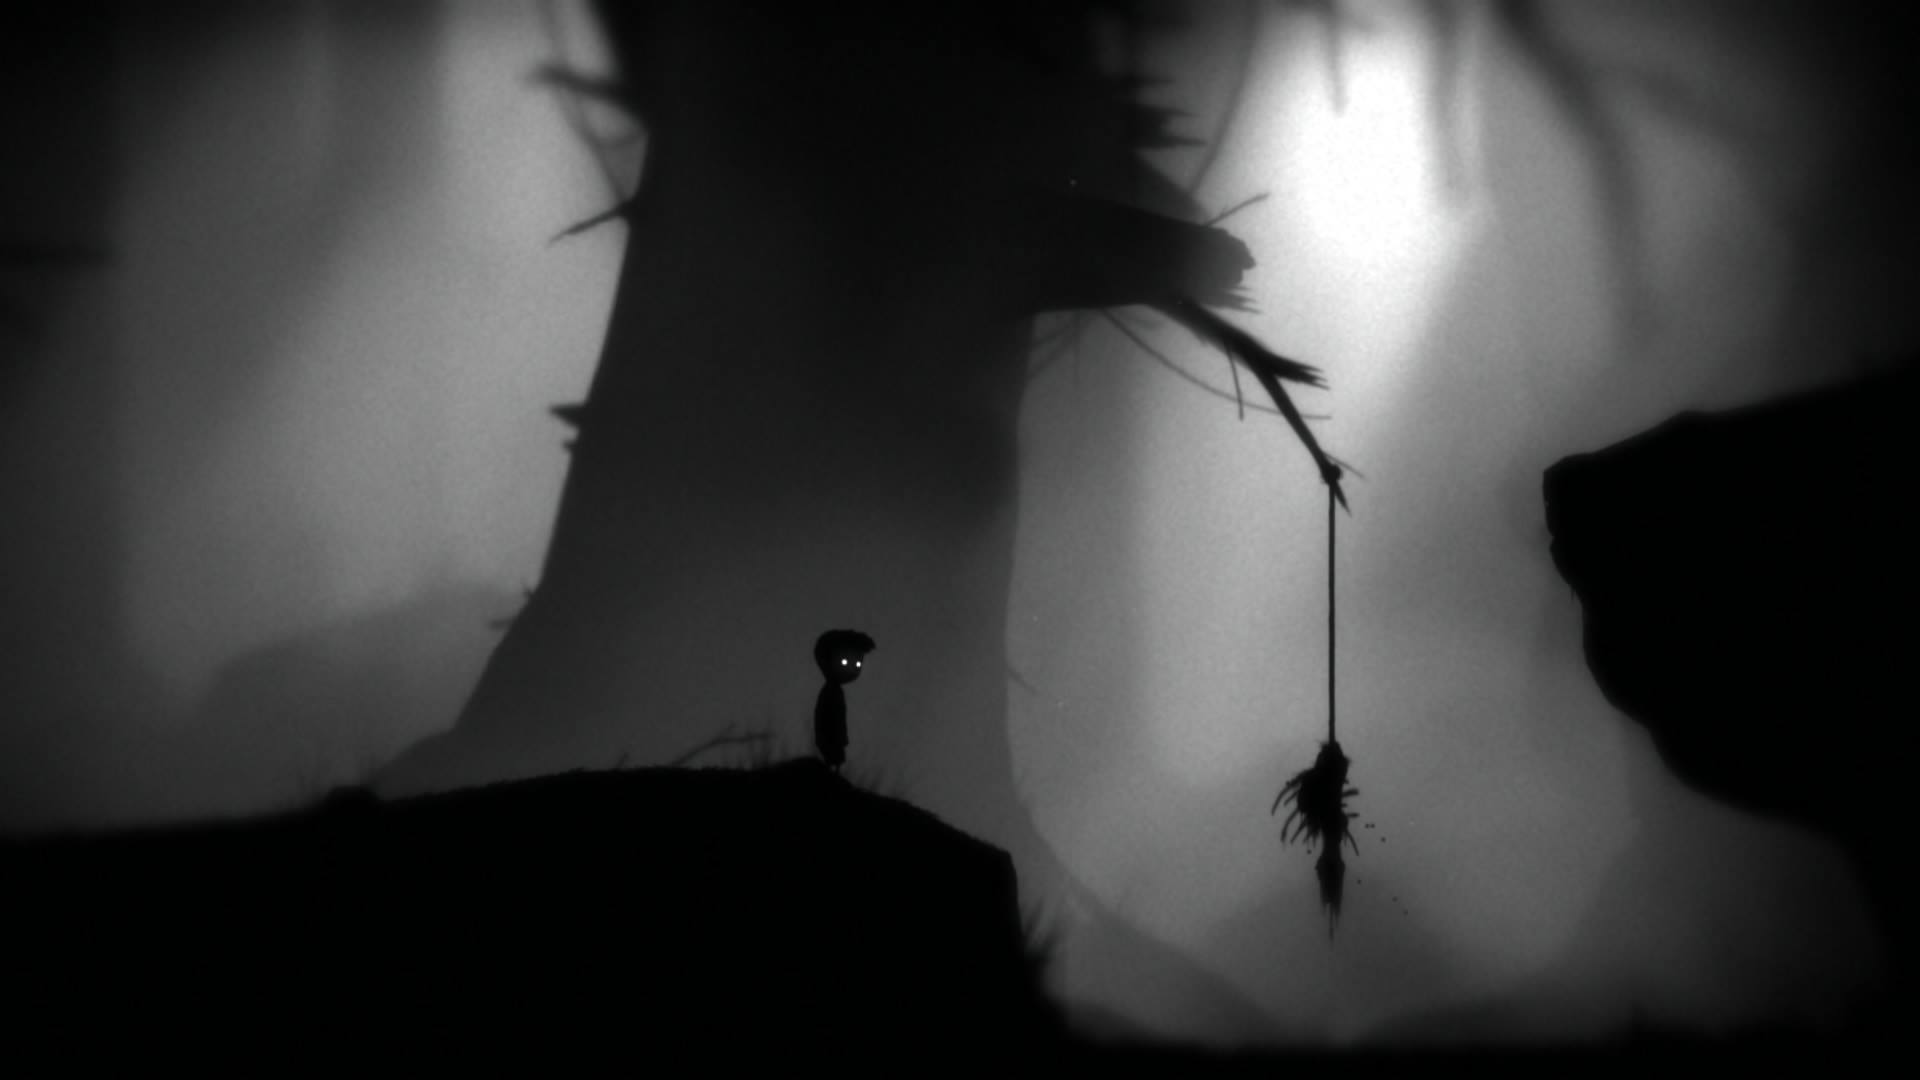 A screenshot from 'Limbo' for the Playstation 4